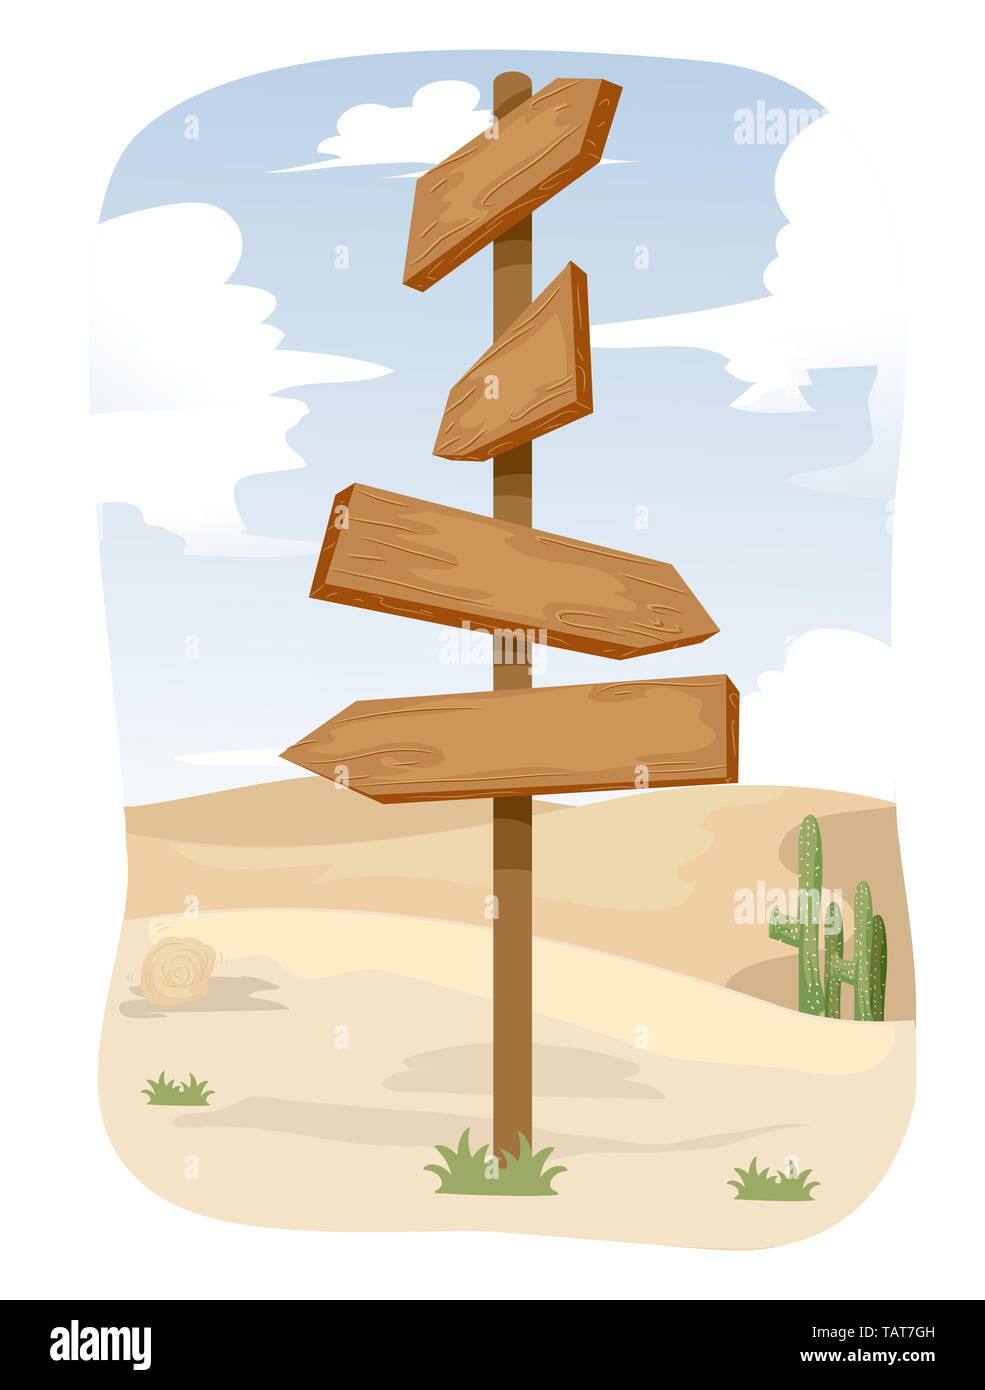 Illustration of a Wooden Direction Signs in the Desert Stock Photo